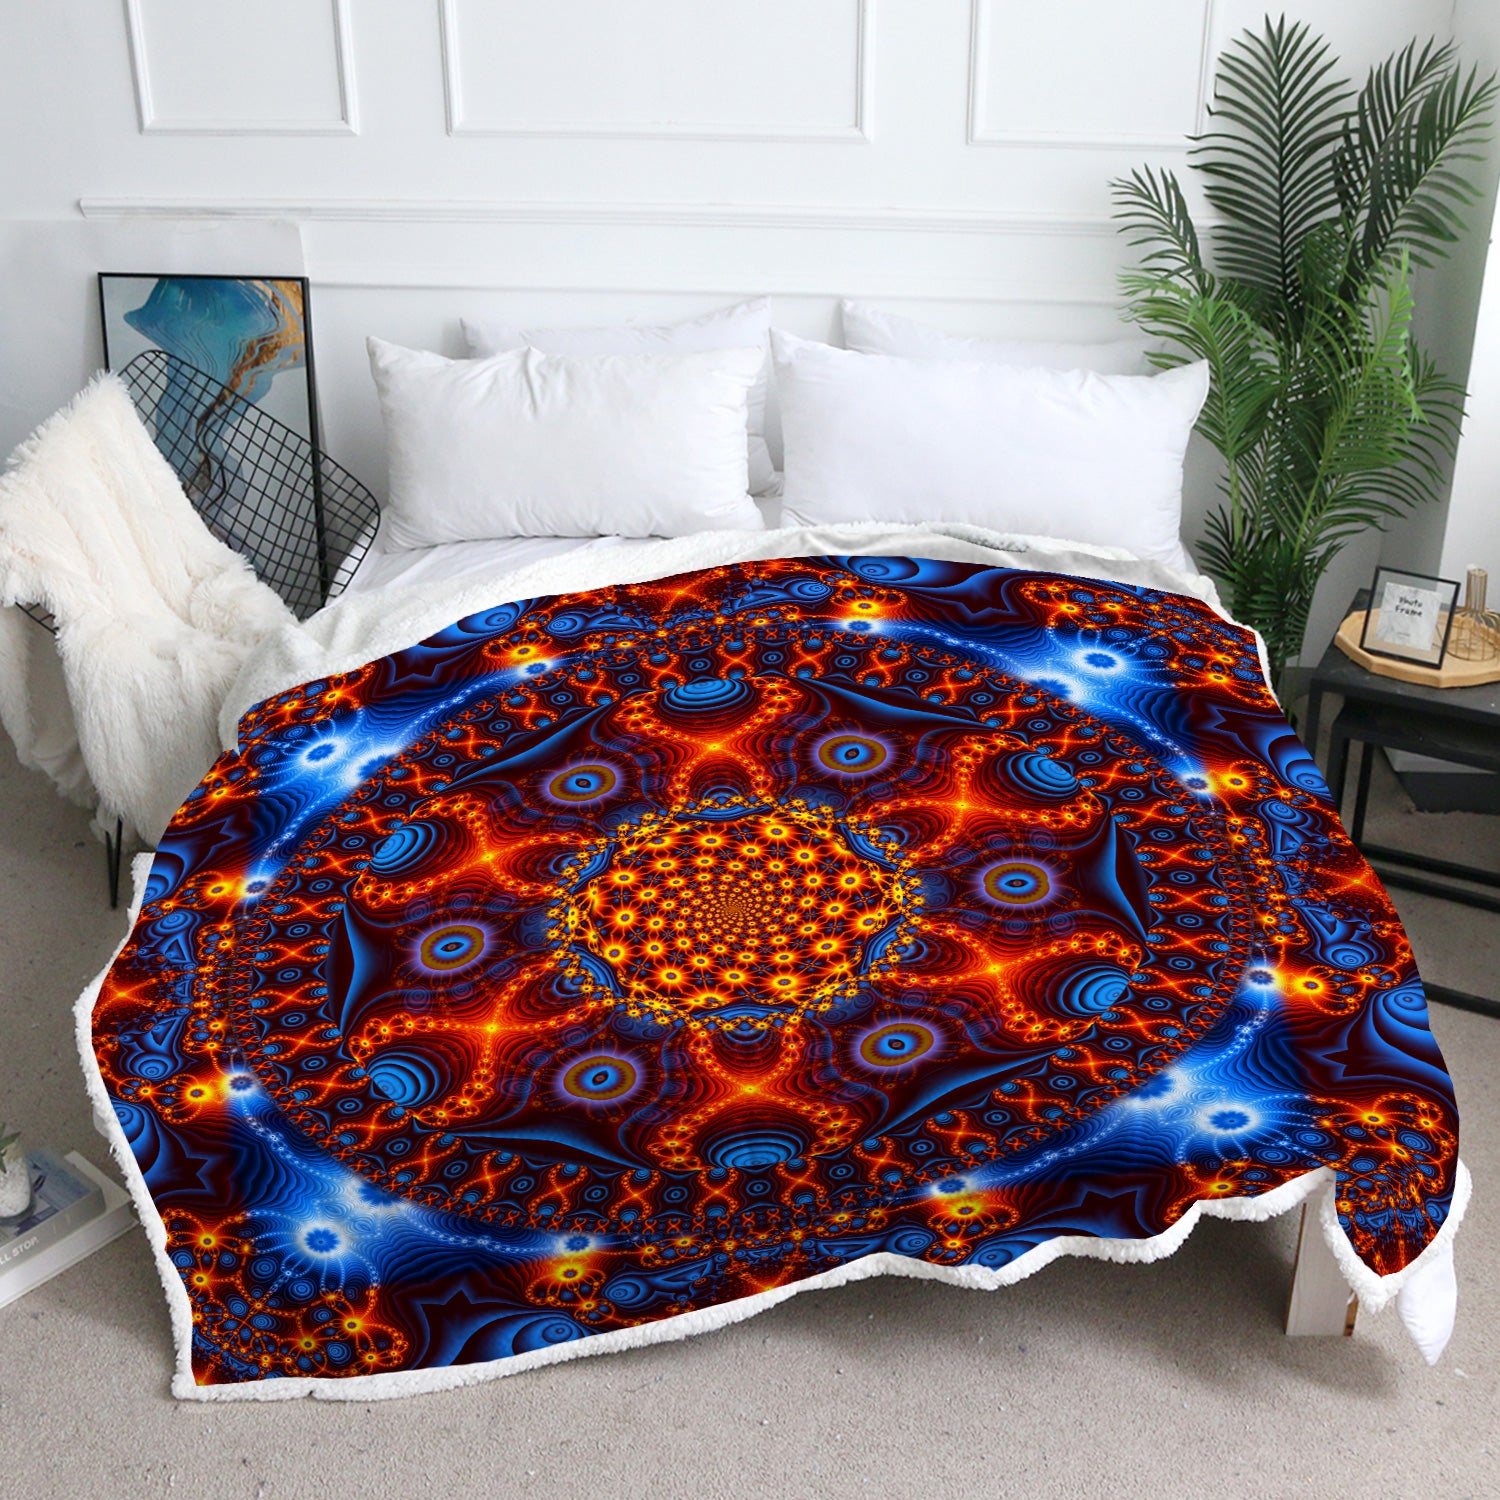 Psychedelic Throw Blanket 1